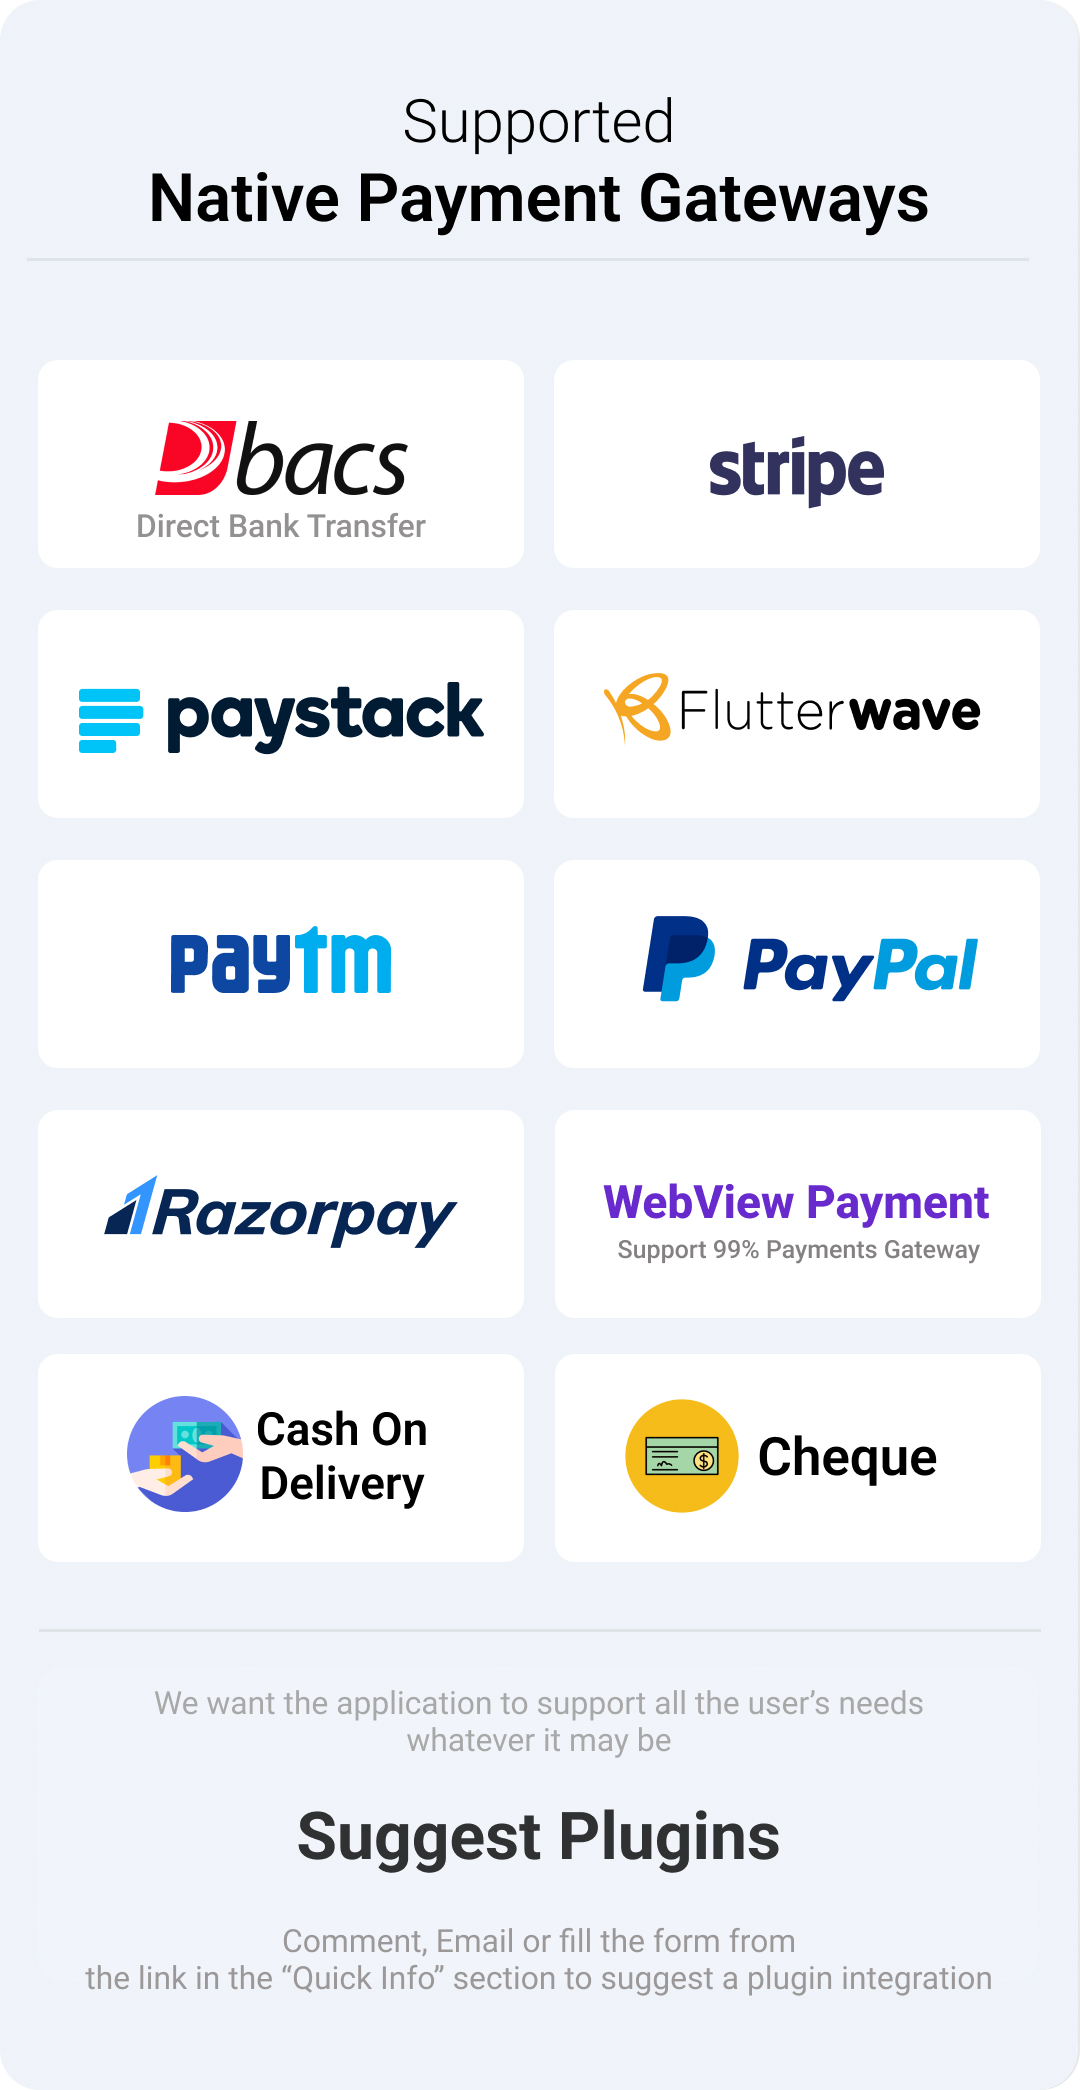 Supported Native Payment Gateways